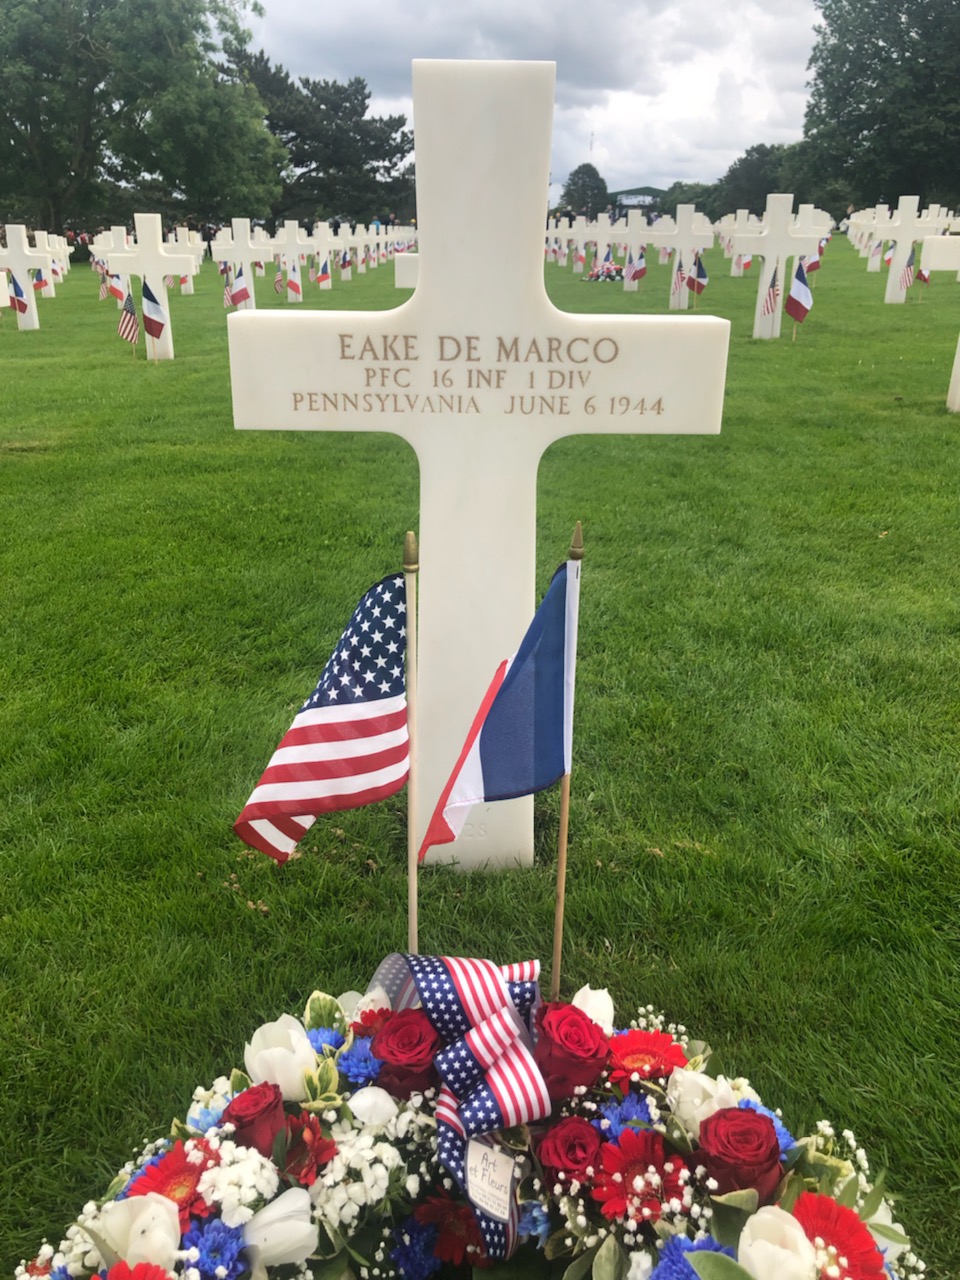 A picture of Private First Class Eake DeMarco's gravesite in St. Laurent, France, U.S. Military cemetery.